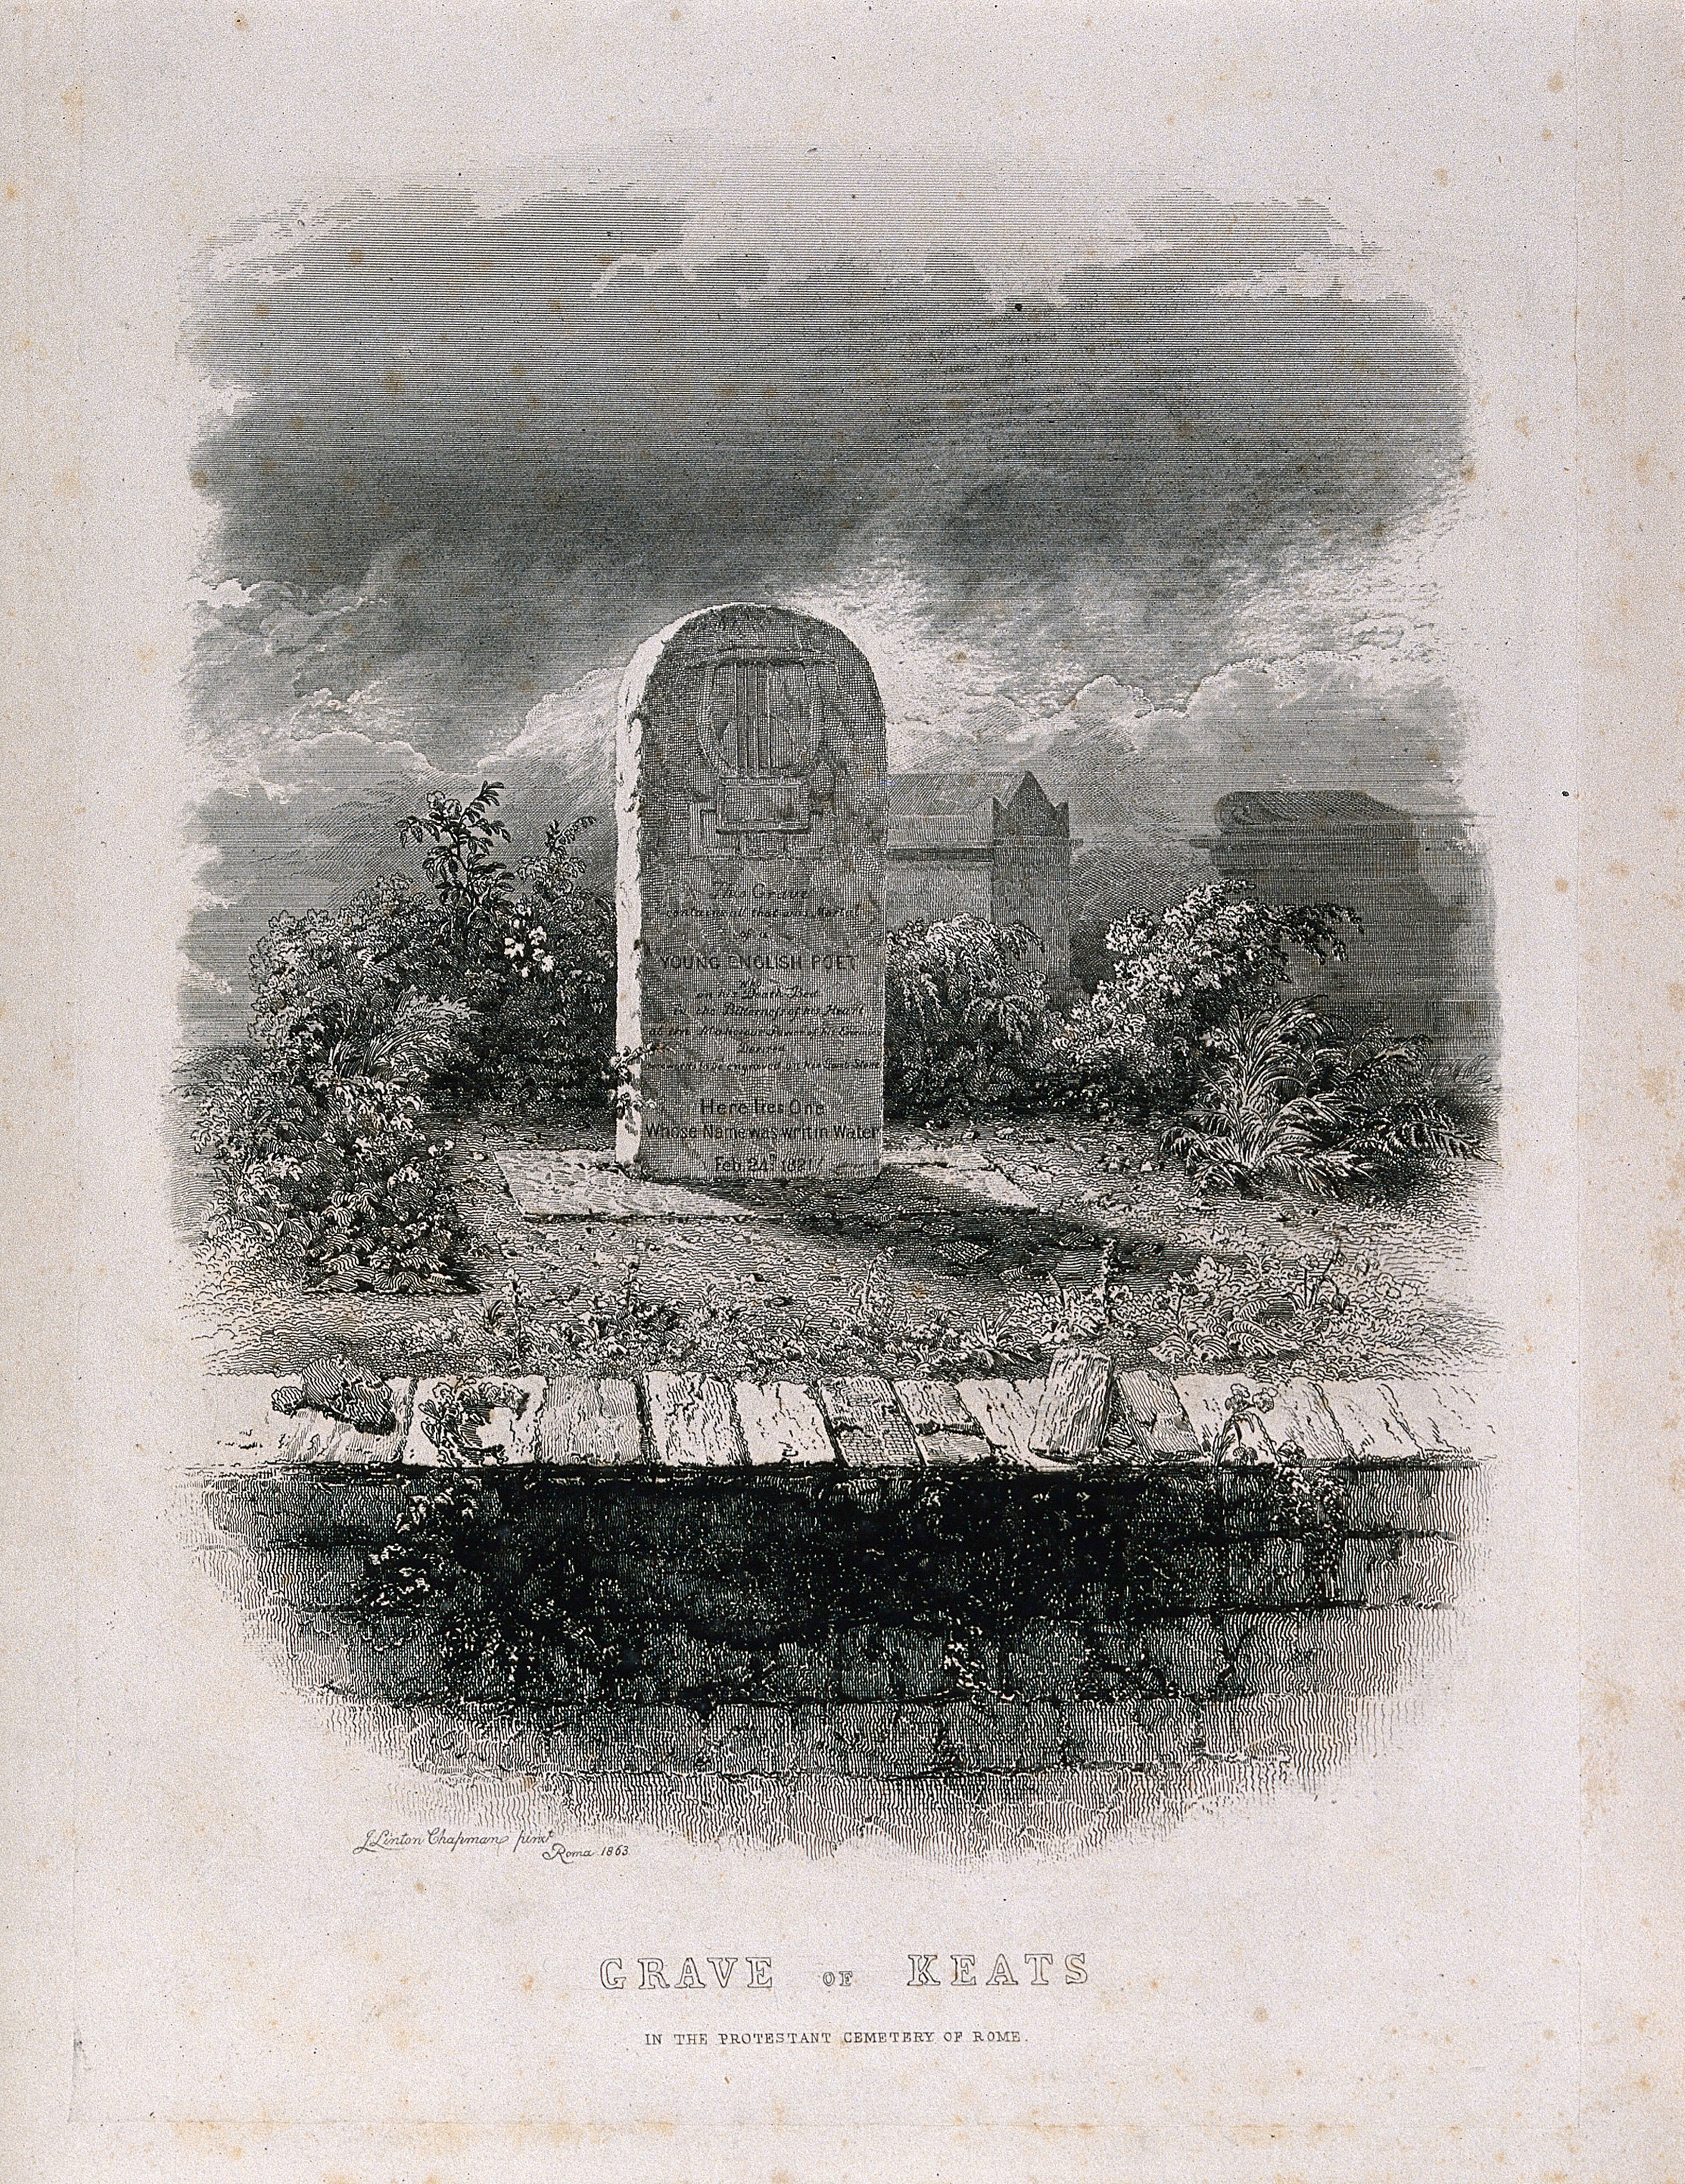 The grave of John Keats in the Protestant cemetery of Rome, Italy. Etching by J.L. Chapman, 1863.